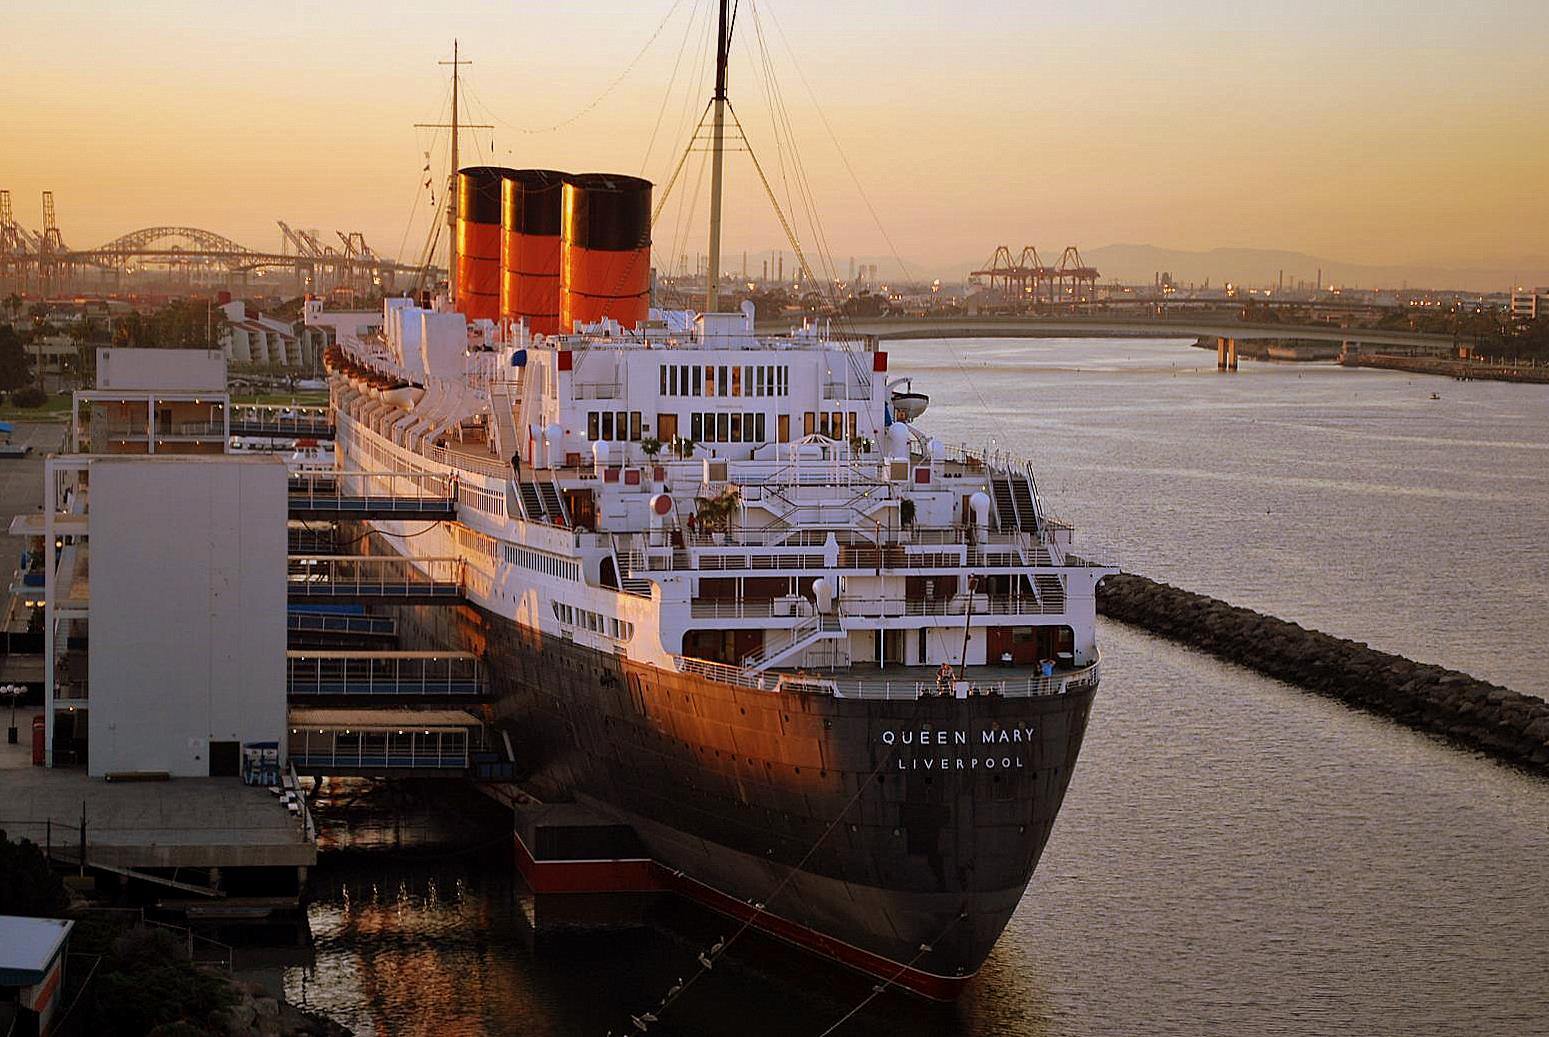 RMS Queen Mary docked in Long Beach